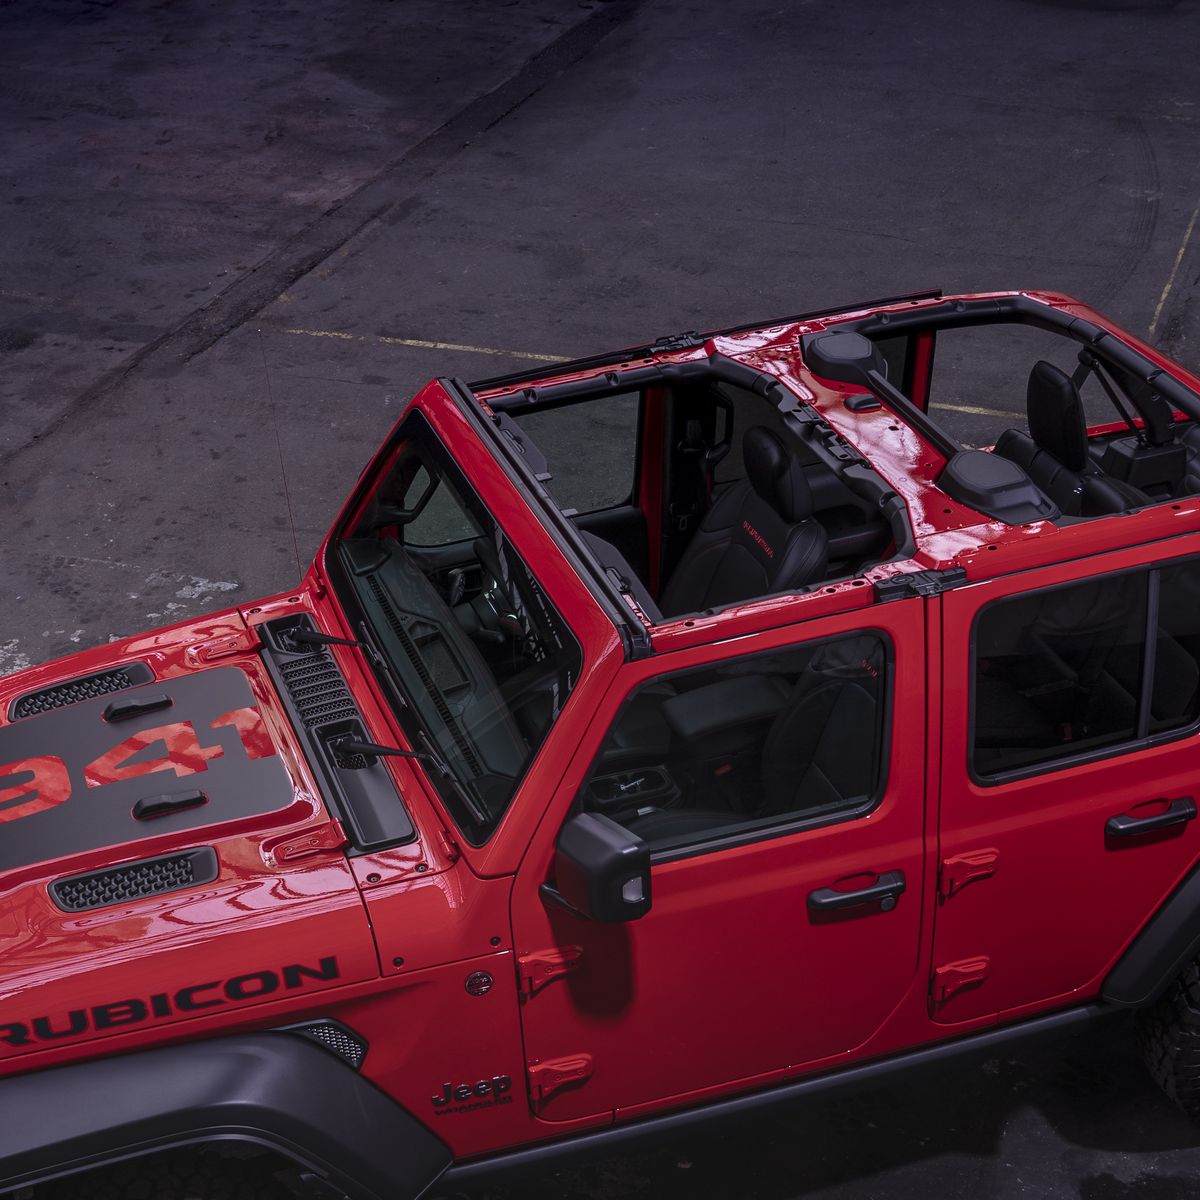 Jeep's Most Expensive Wrangler Is a Super-Limited 1941 Edition